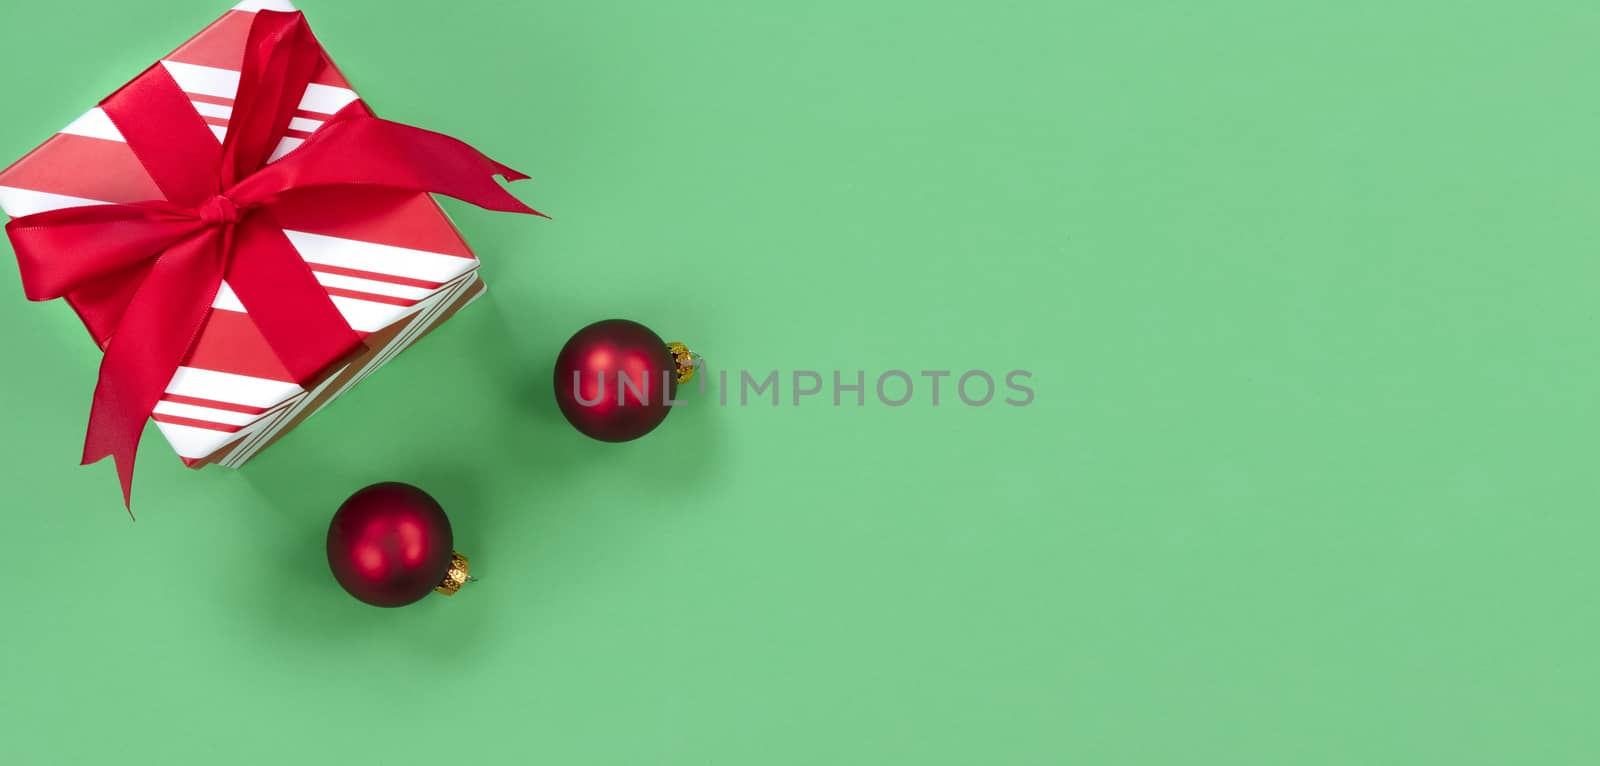 Green background with gift box and red ornaments for the Christmas season 